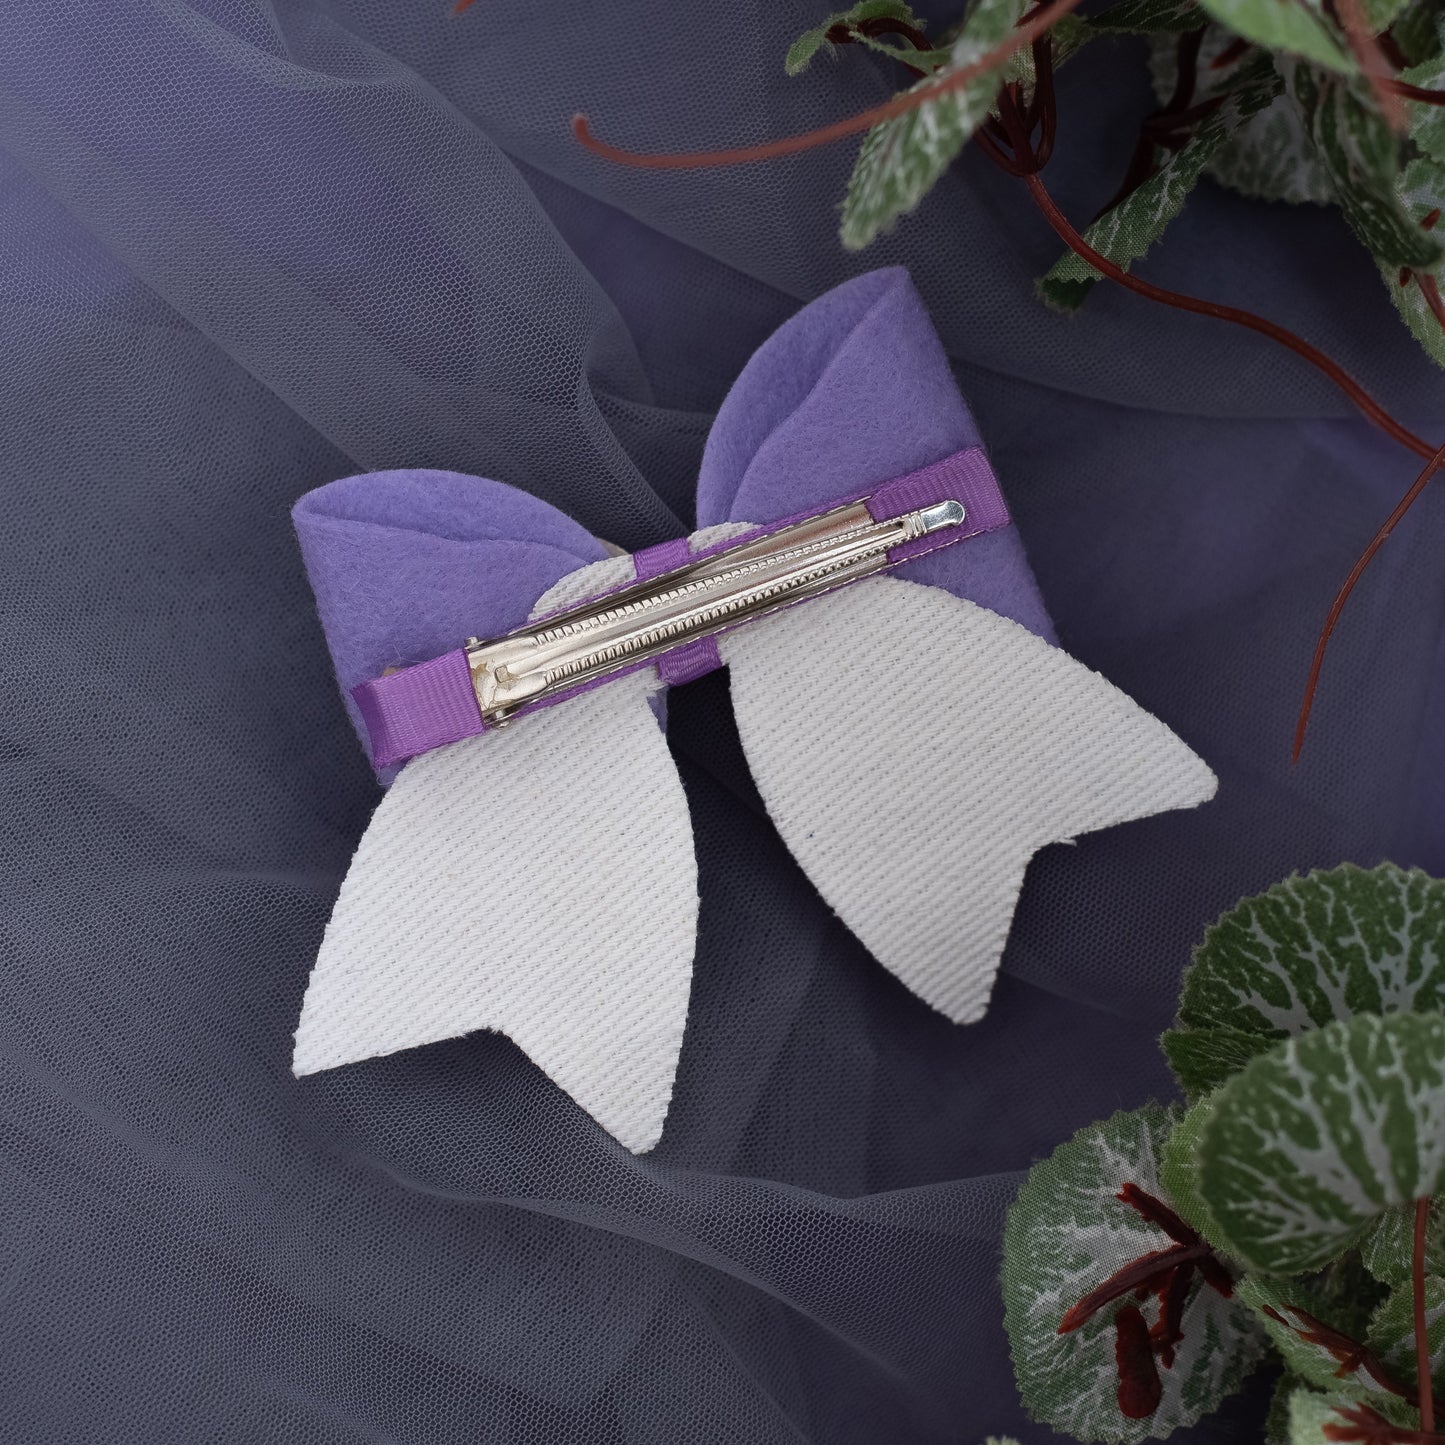 Large, Fancy Party Bow with Shimmer on Alligator Clip- Purple